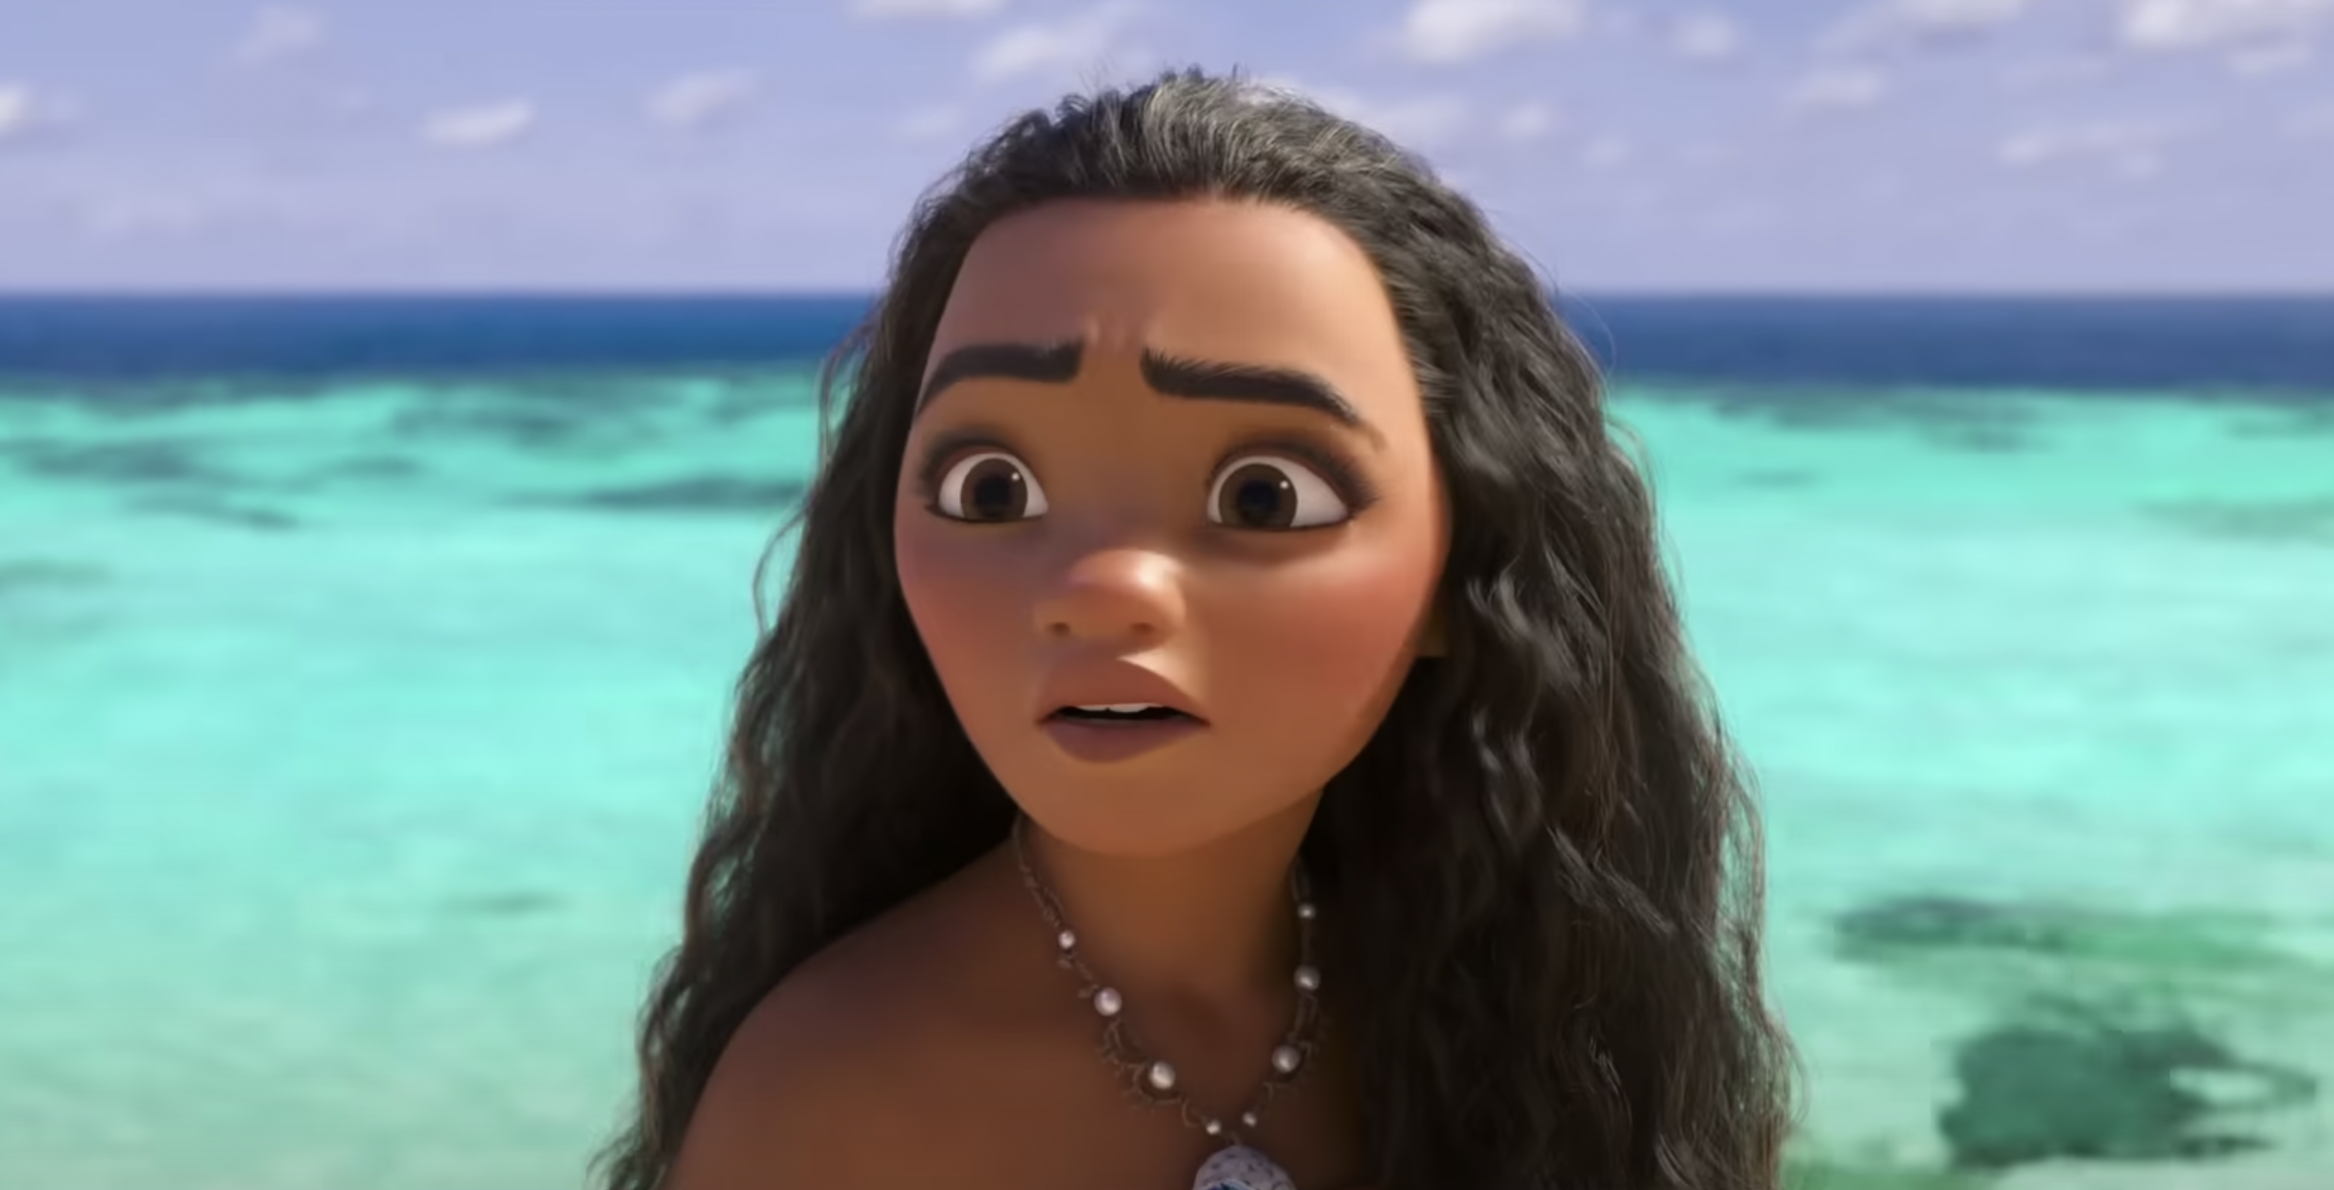 Why Disney Needs Live-Action Remakes of Moana and Frozen